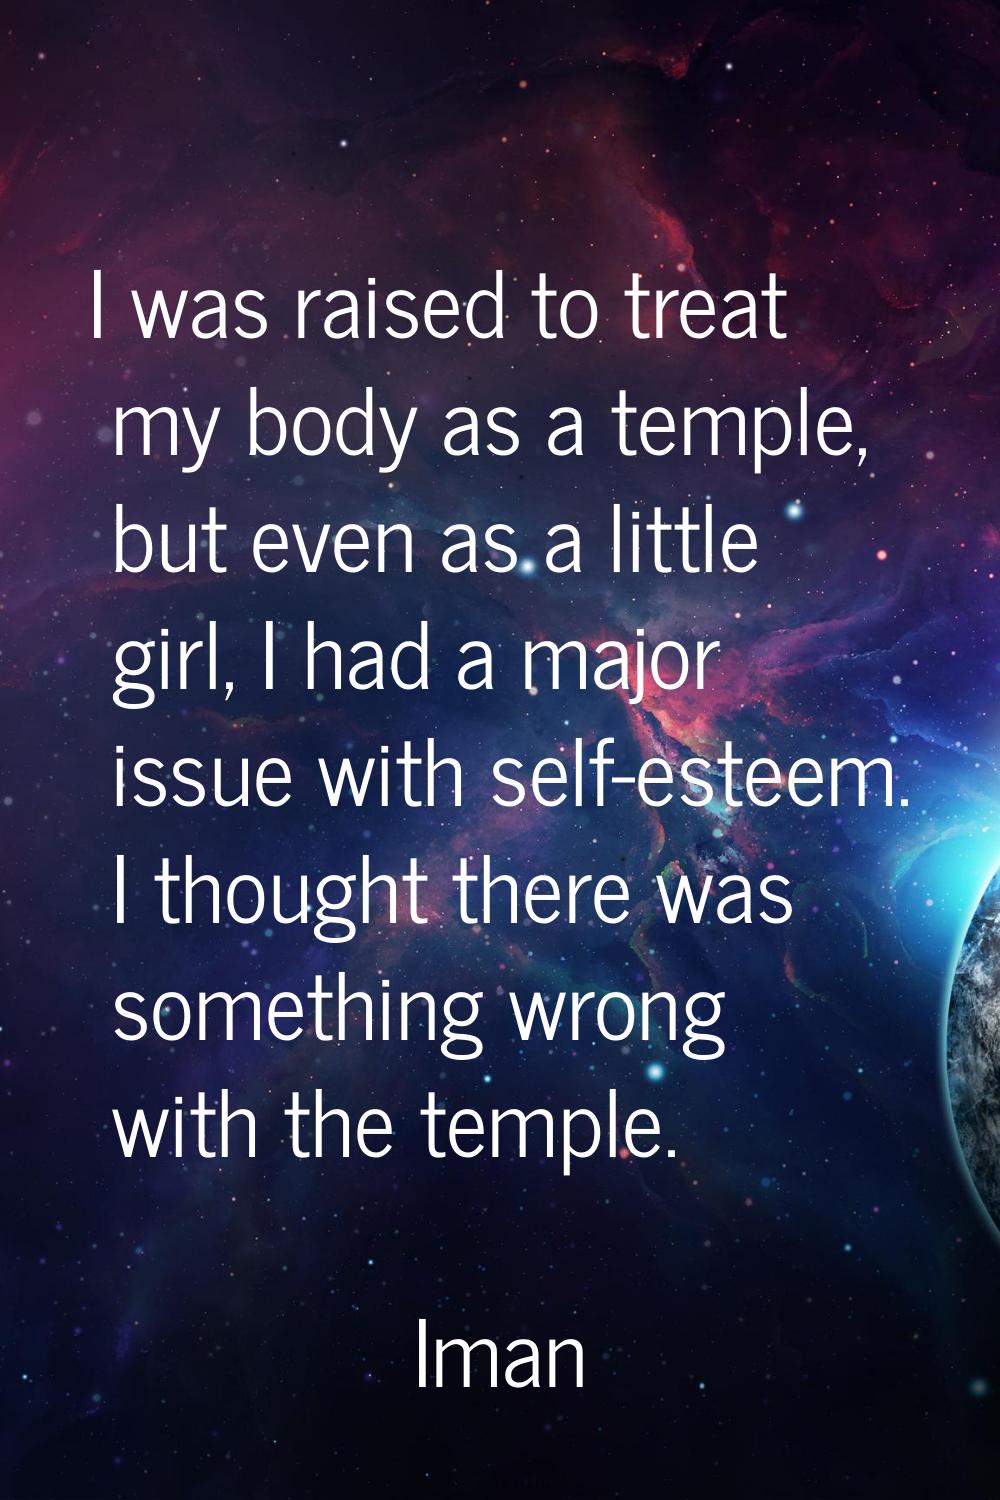 I was raised to treat my body as a temple, but even as a little girl, I had a major issue with self